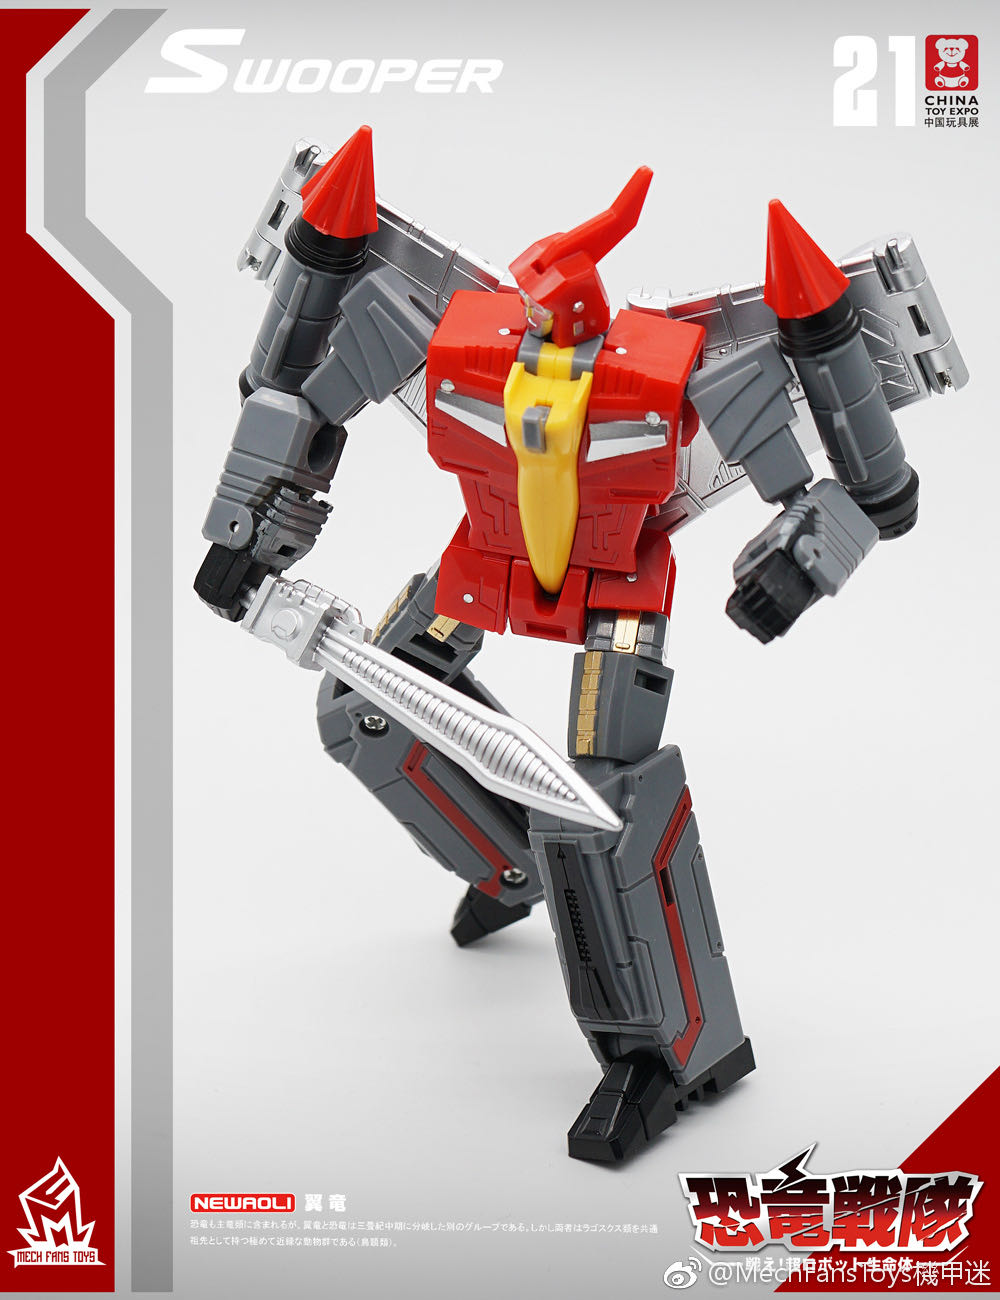 Transformers MFT MF-21 Swooper(Swoop) - Mech Fans Toys (Movie Cast) action figure collectible - Main Image 1